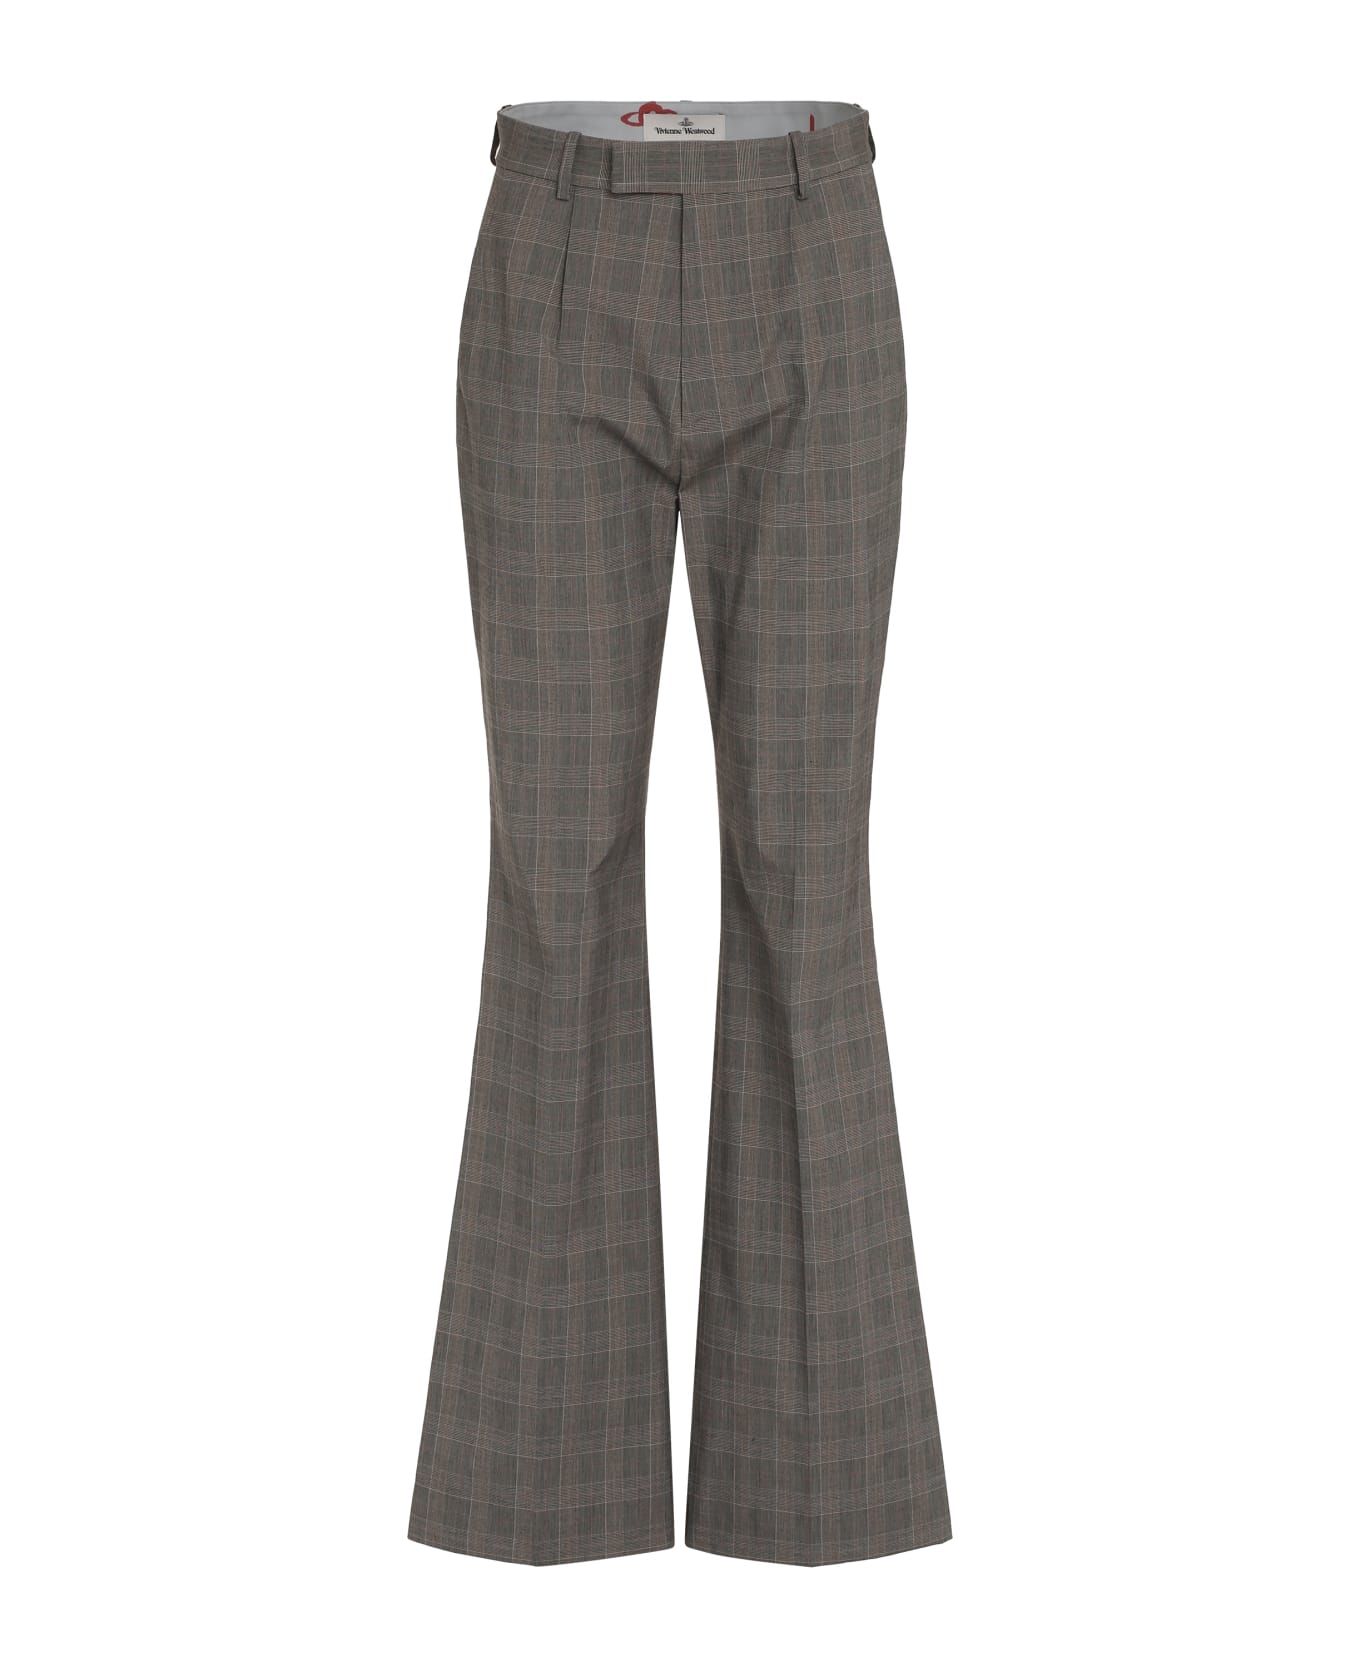 Vivienne Westwood Ray Prince-of-wales Checked Trousers - grey ボトムス